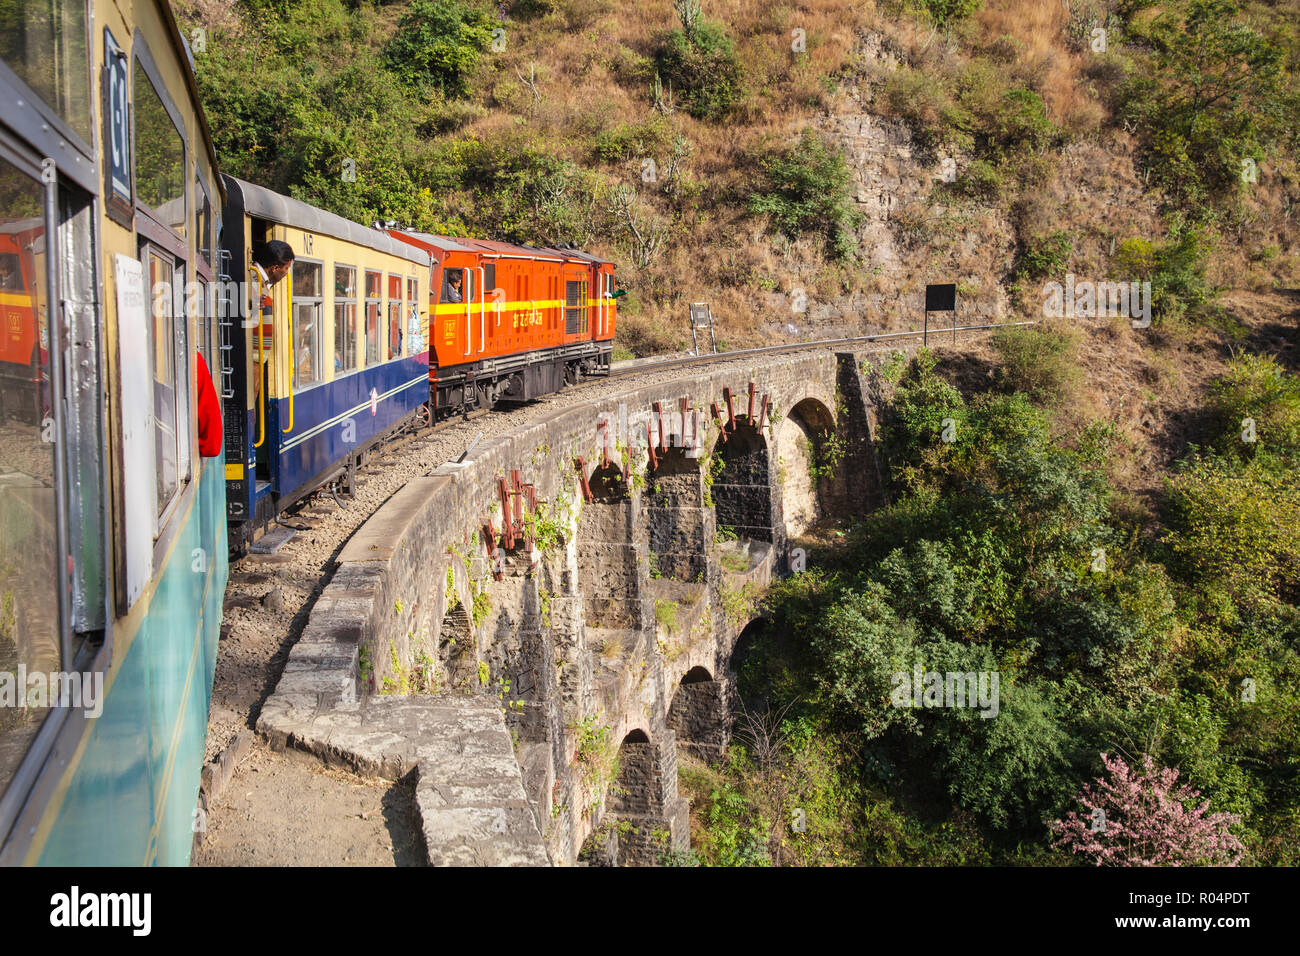 The Himalayan Queen toy train crossing a viaduct, on the Kalka to Shimla Railway, UNESCO World Heritage Site, Northwest India, Asia Stock Photo